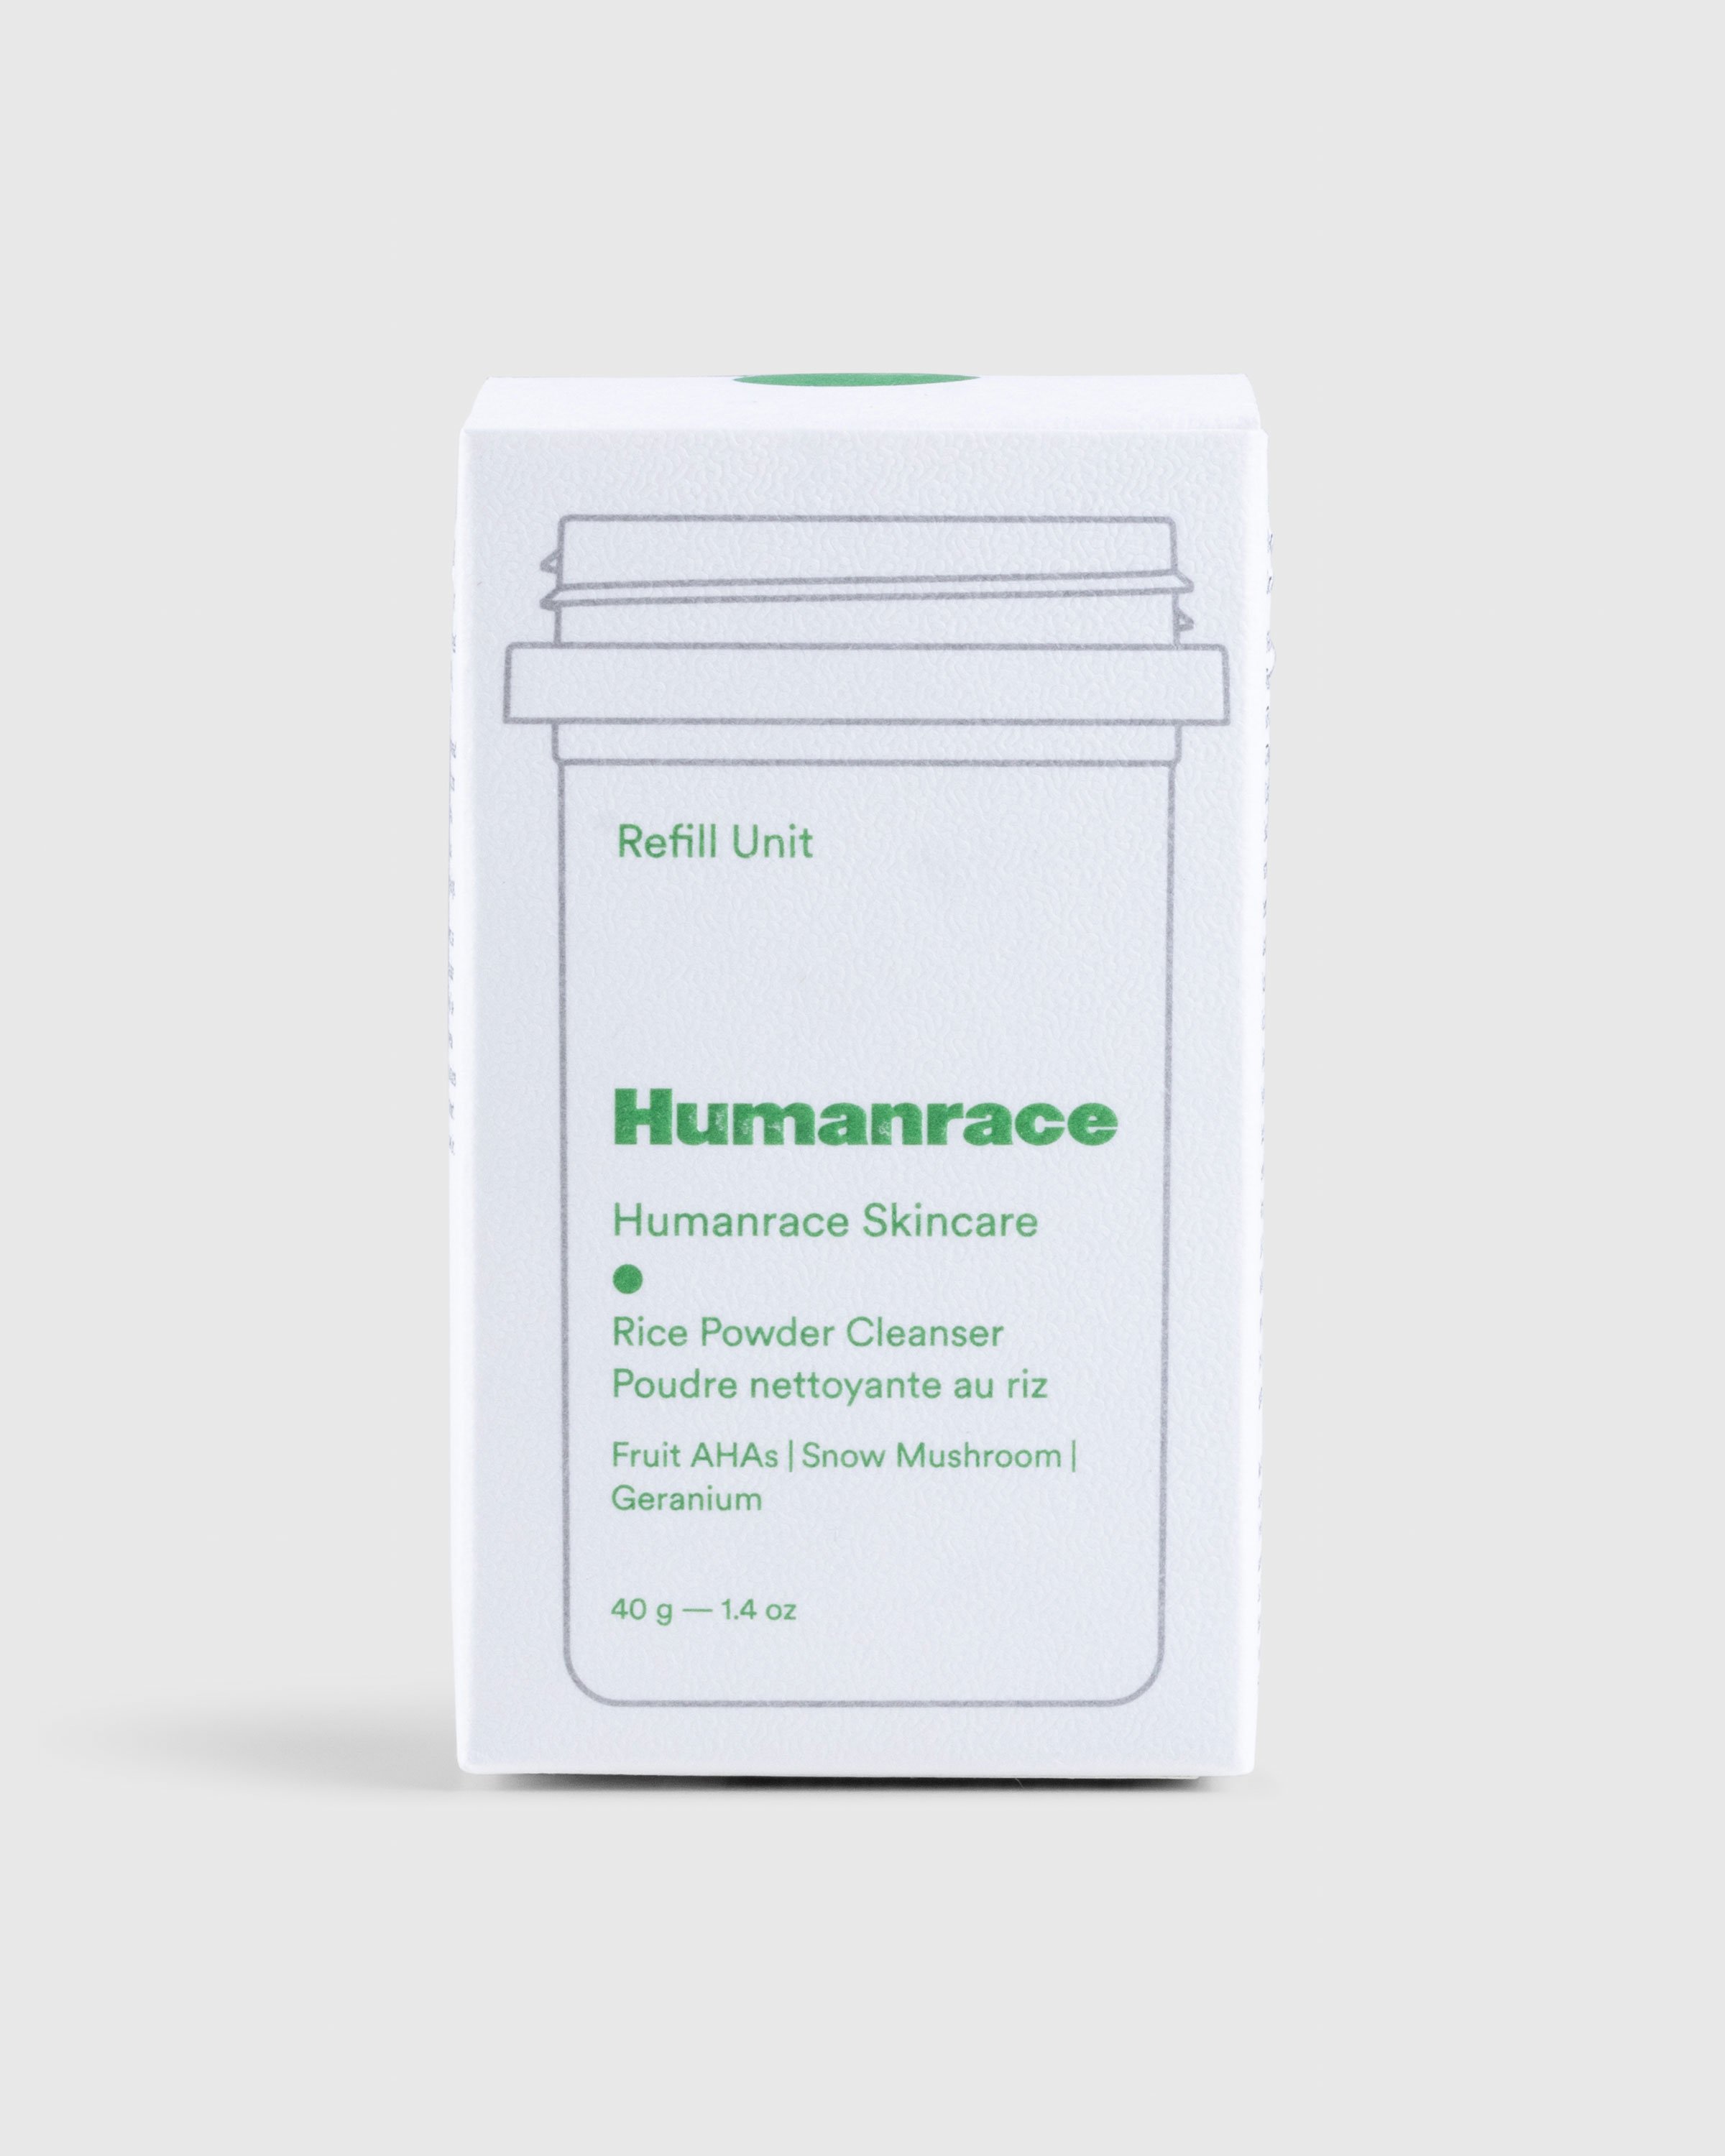 Humanrace - Rice Powder Cleanser Refill - Lifestyle - Beige - Image 2